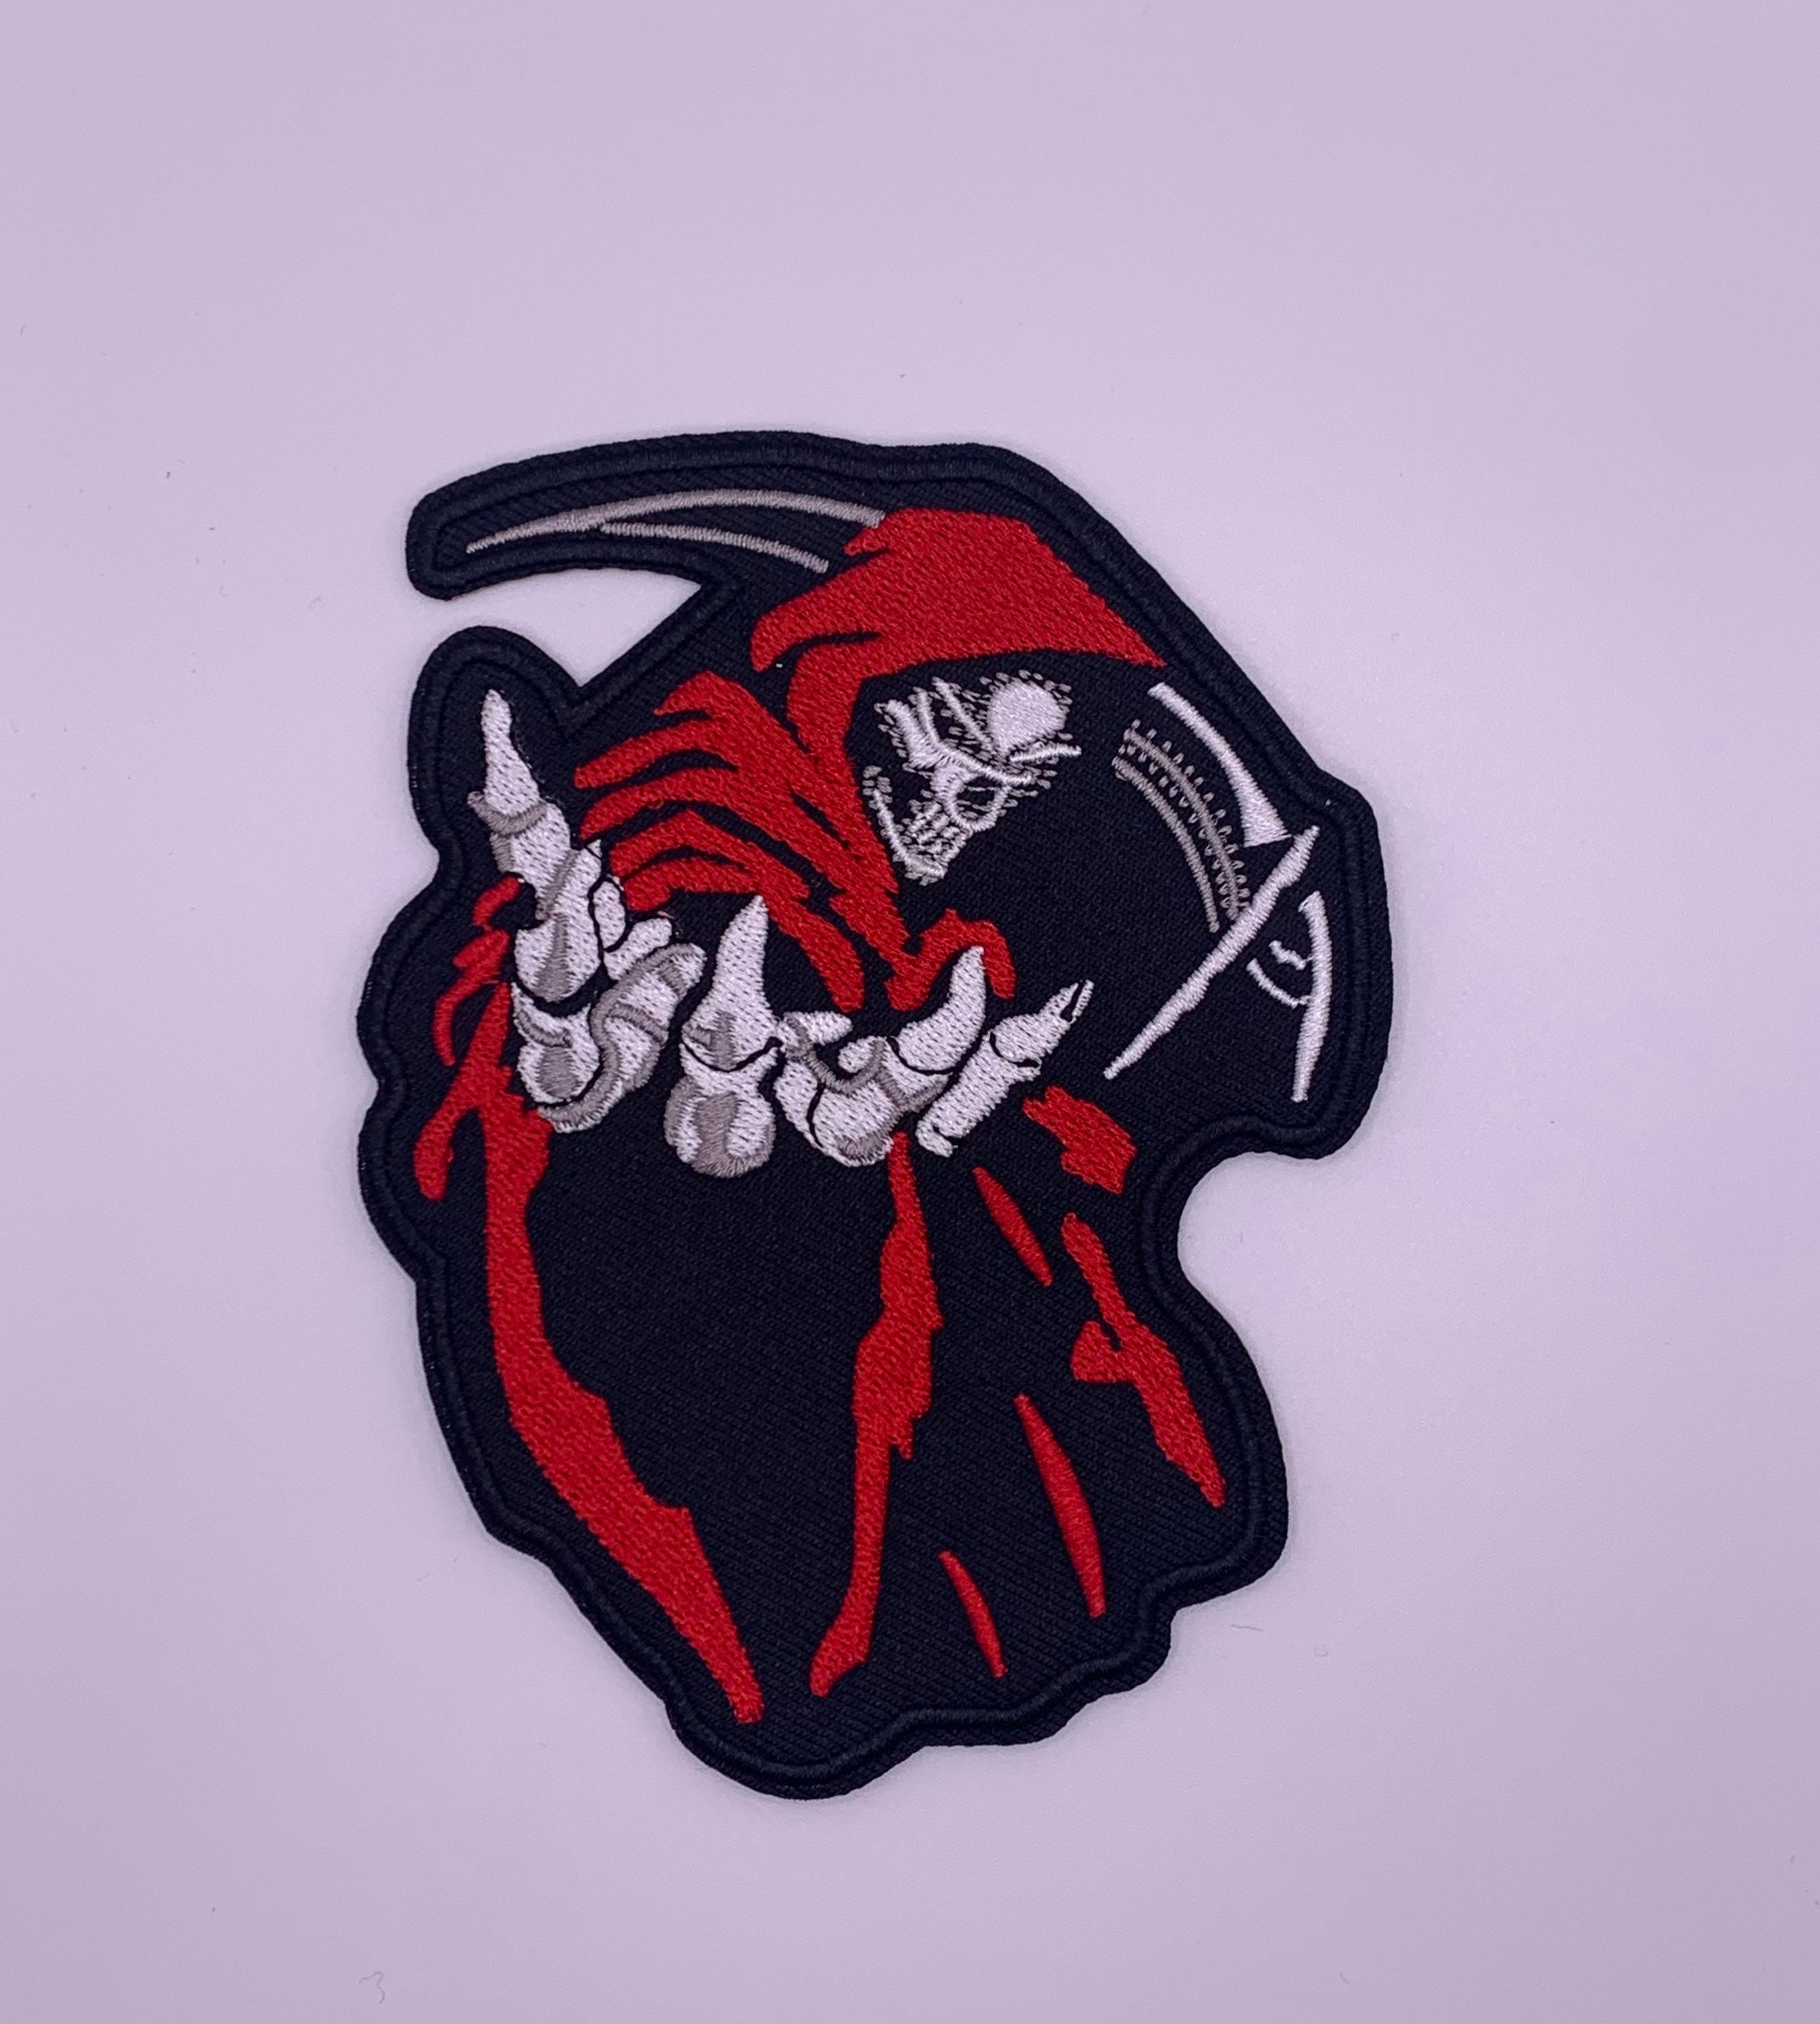 Skull Reaper Embroidered Iron On Patches For DIY Sewing On Jackets